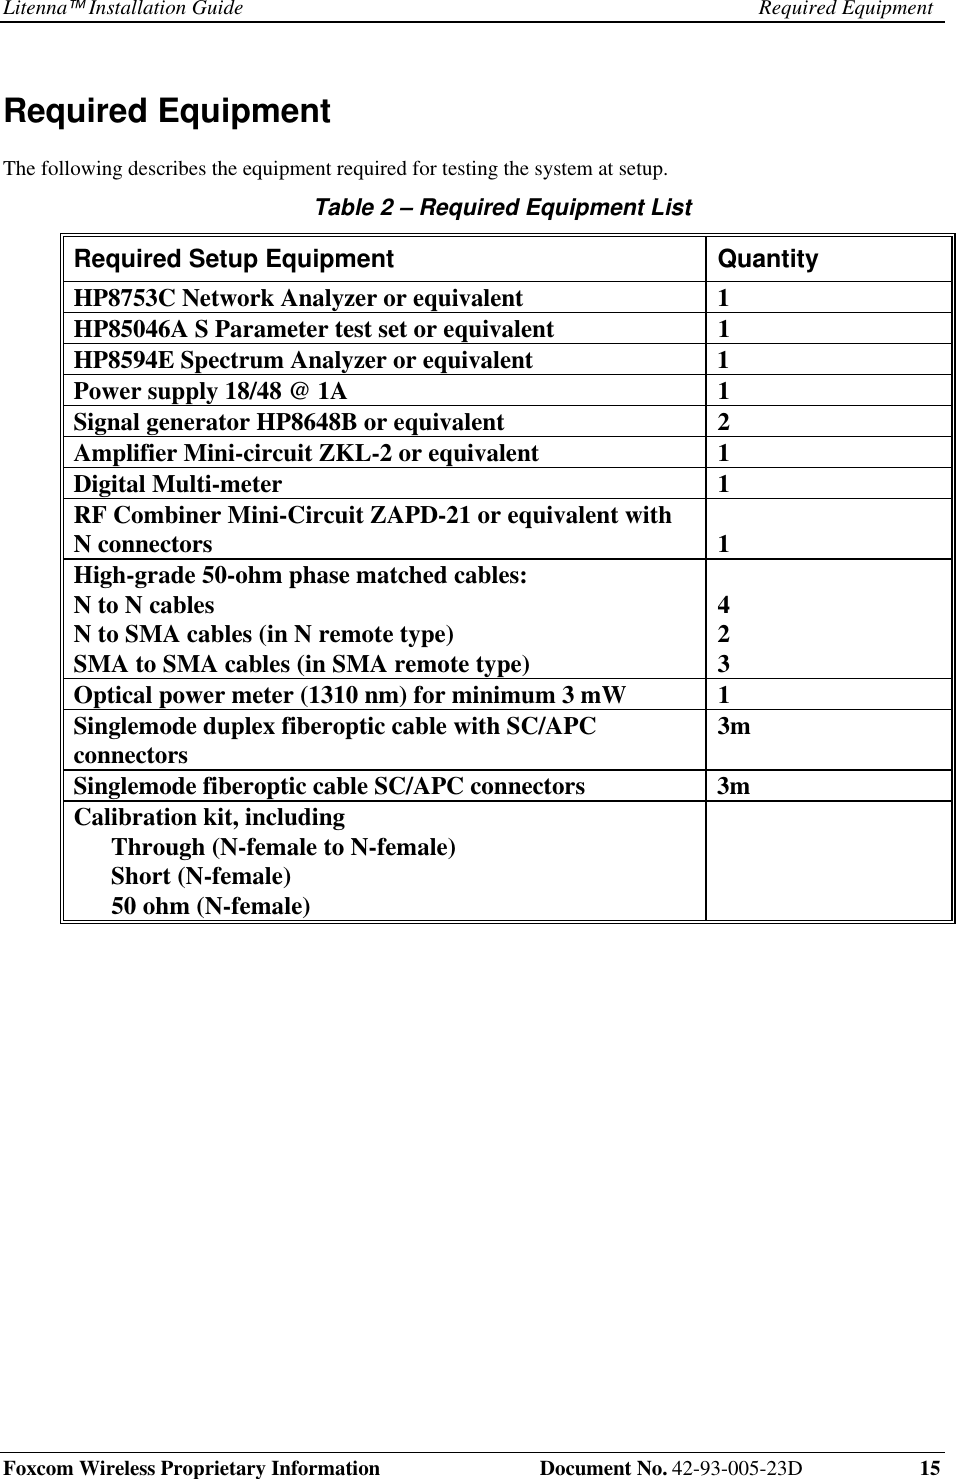 Litenna Installation Guide Required EquipmentFoxcom Wireless Proprietary Information  Document No. 42-93-005-23D 15Required EquipmentThe following describes the equipment required for testing the system at setup.Table 2 – Required Equipment ListRequired Setup Equipment QuantityHP8753C Network Analyzer or equivalent 1HP85046A S Parameter test set or equivalent 1HP8594E Spectrum Analyzer or equivalent 1Power supply 18/48 @ 1A 1Signal generator HP8648B or equivalent 2Amplifier Mini-circuit ZKL-2 or equivalent 1Digital Multi-meter 1RF Combiner Mini-Circuit ZAPD-21 or equivalent withN connectors 1High-grade 50-ohm phase matched cables:N to N cablesN to SMA cables (in N remote type)SMA to SMA cables (in SMA remote type)423Optical power meter (1310 nm) for minimum 3 mW 1Singlemode duplex fiberoptic cable with SC/APCconnectors 3mSinglemode fiberoptic cable SC/APC connectors 3mCalibration kit, including      Through (N-female to N-female)      Short (N-female)      50 ohm (N-female)